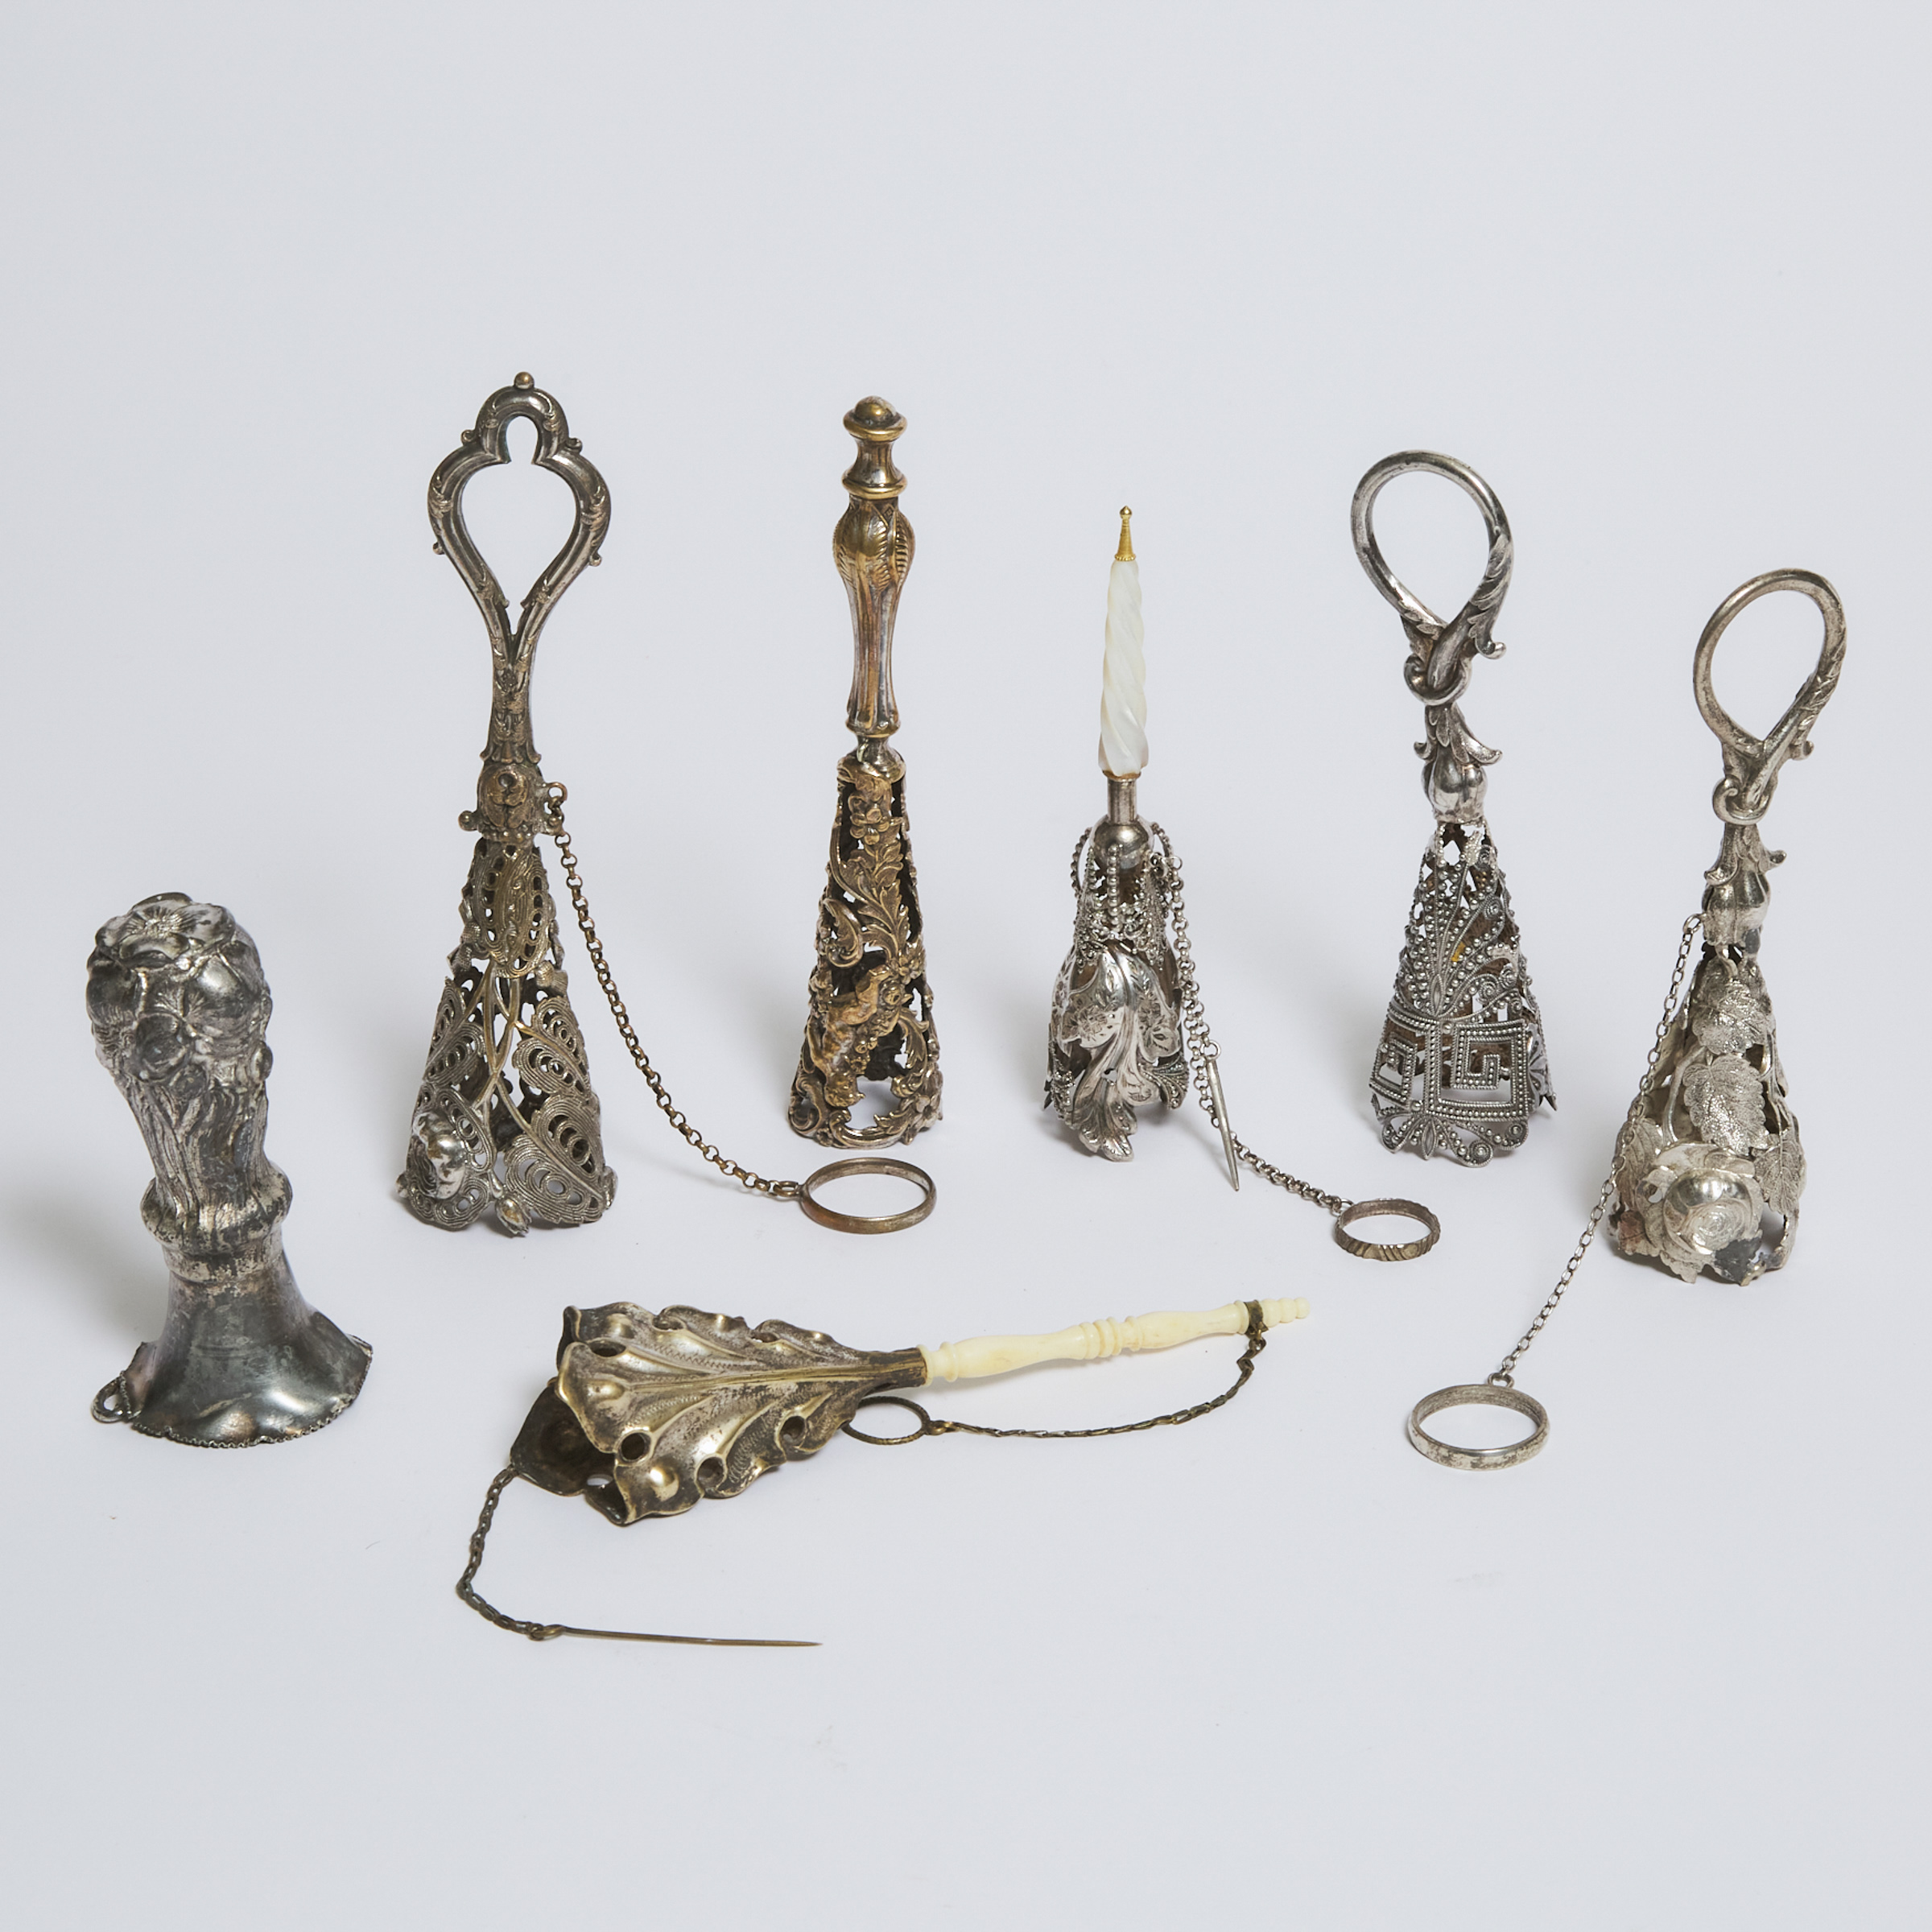 Seven Victorian Silver or Silvered Metal Posy Holders, 19th century